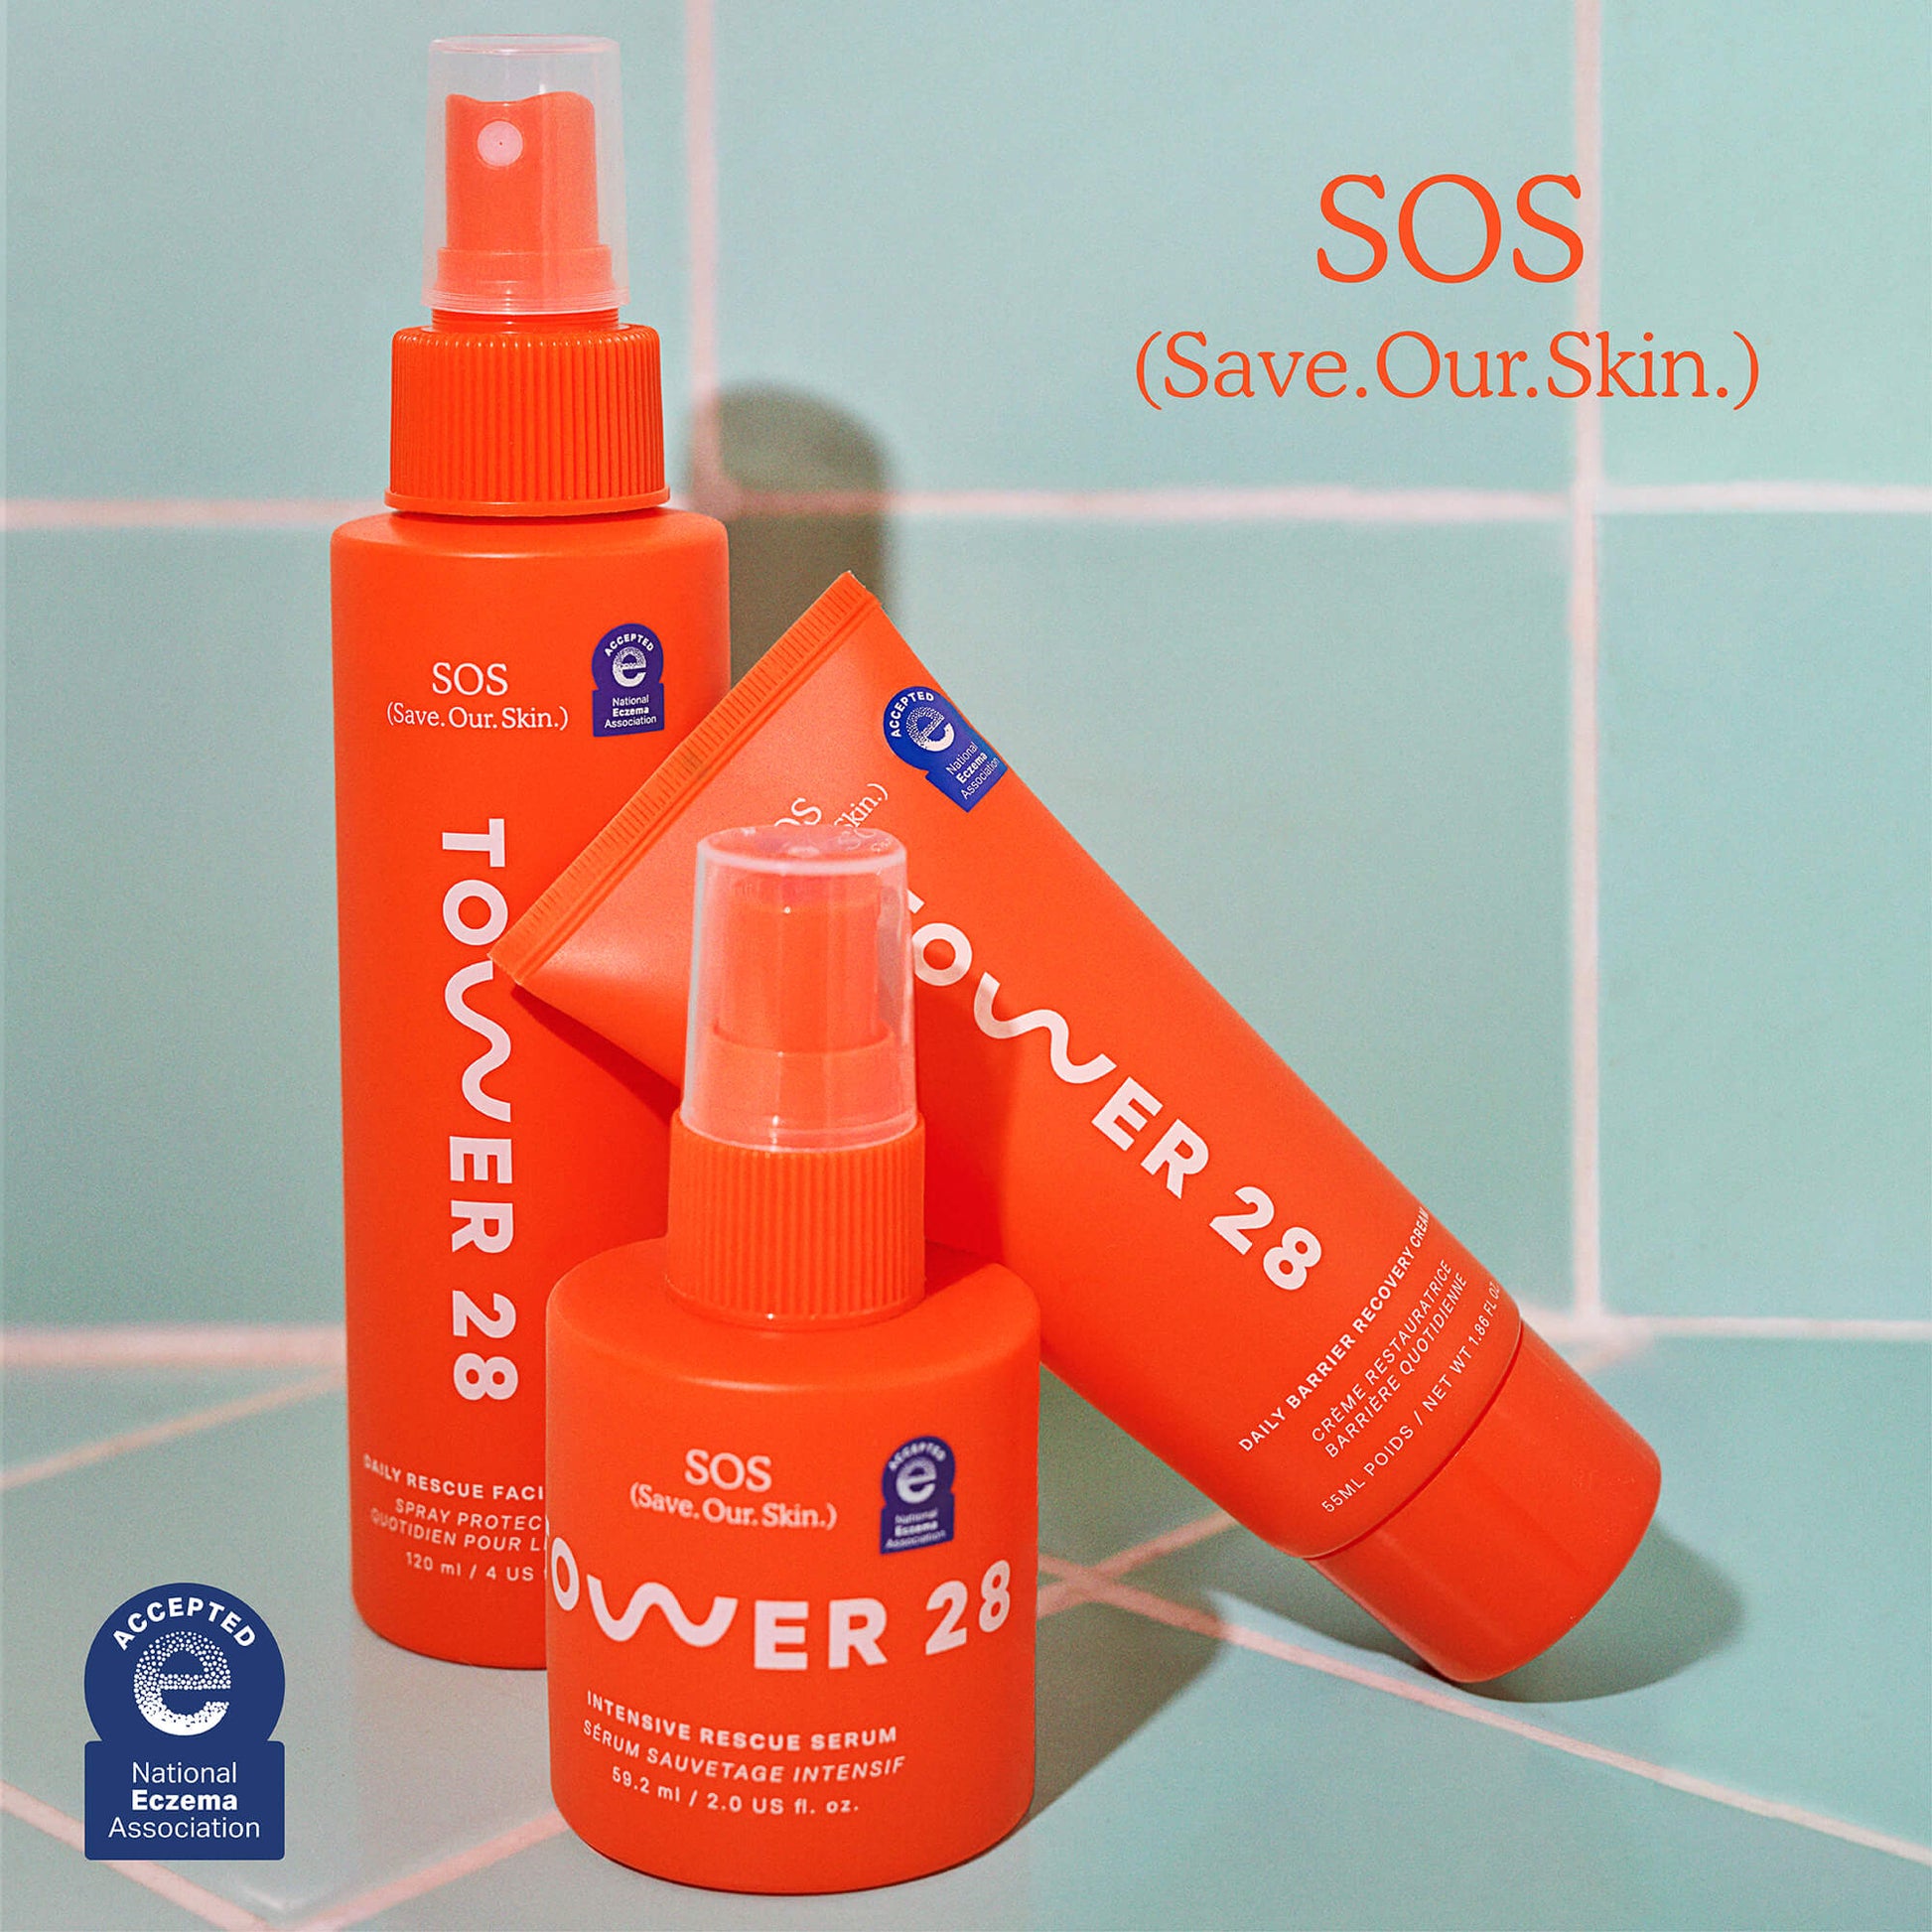 [Shared: Tower 28 Beauty SOS Recovery Cream alongside SOS Rescue Spray and SOS Rescue Serum with the National Eczema Association Seal of Acceptance